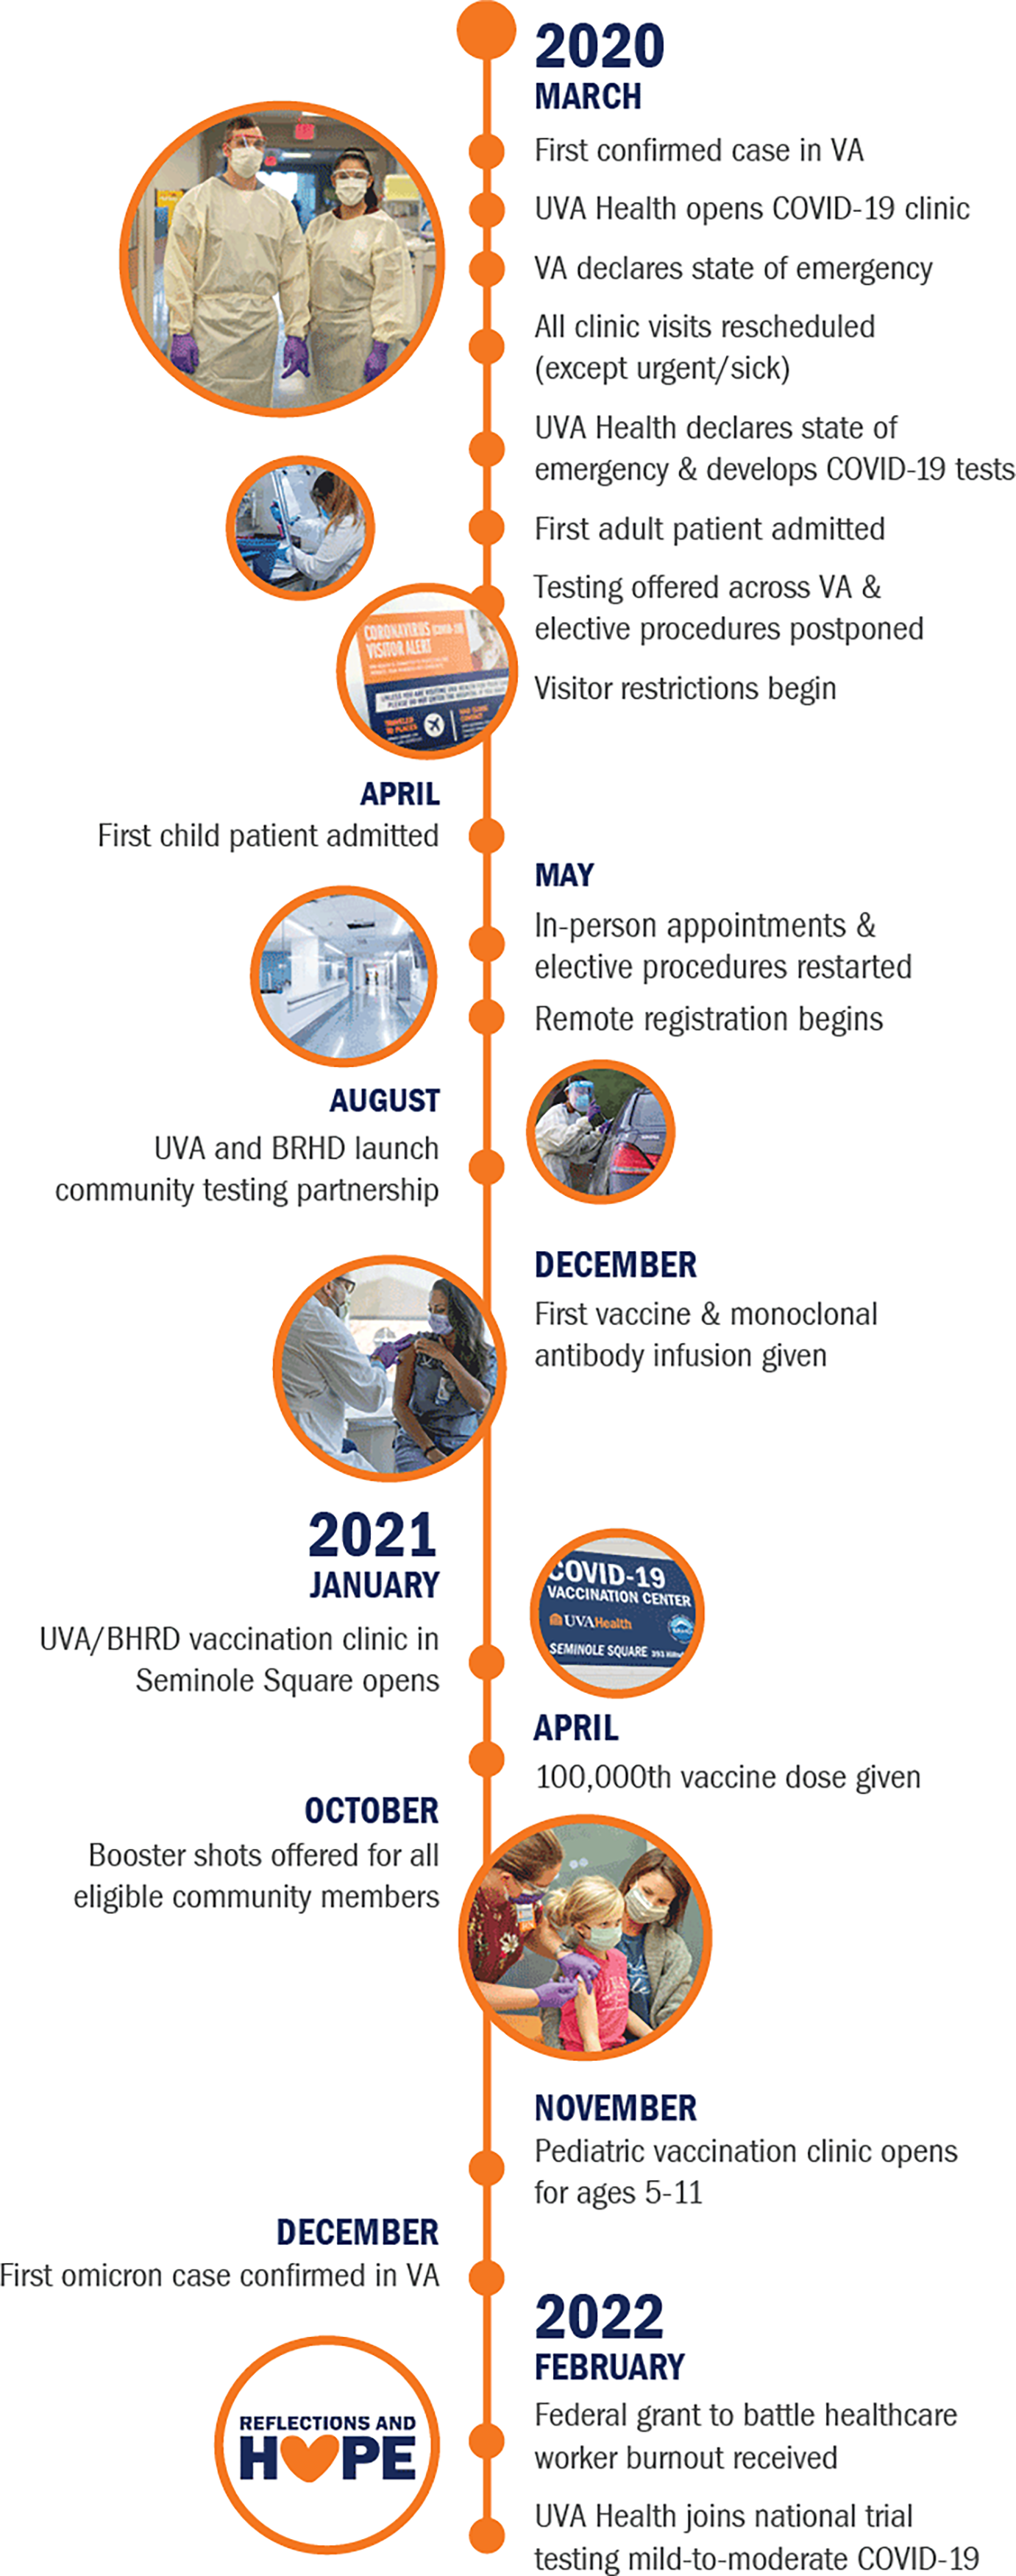 this timeline of COVID-19 care at UVA Health highlights notable moments over the past two years